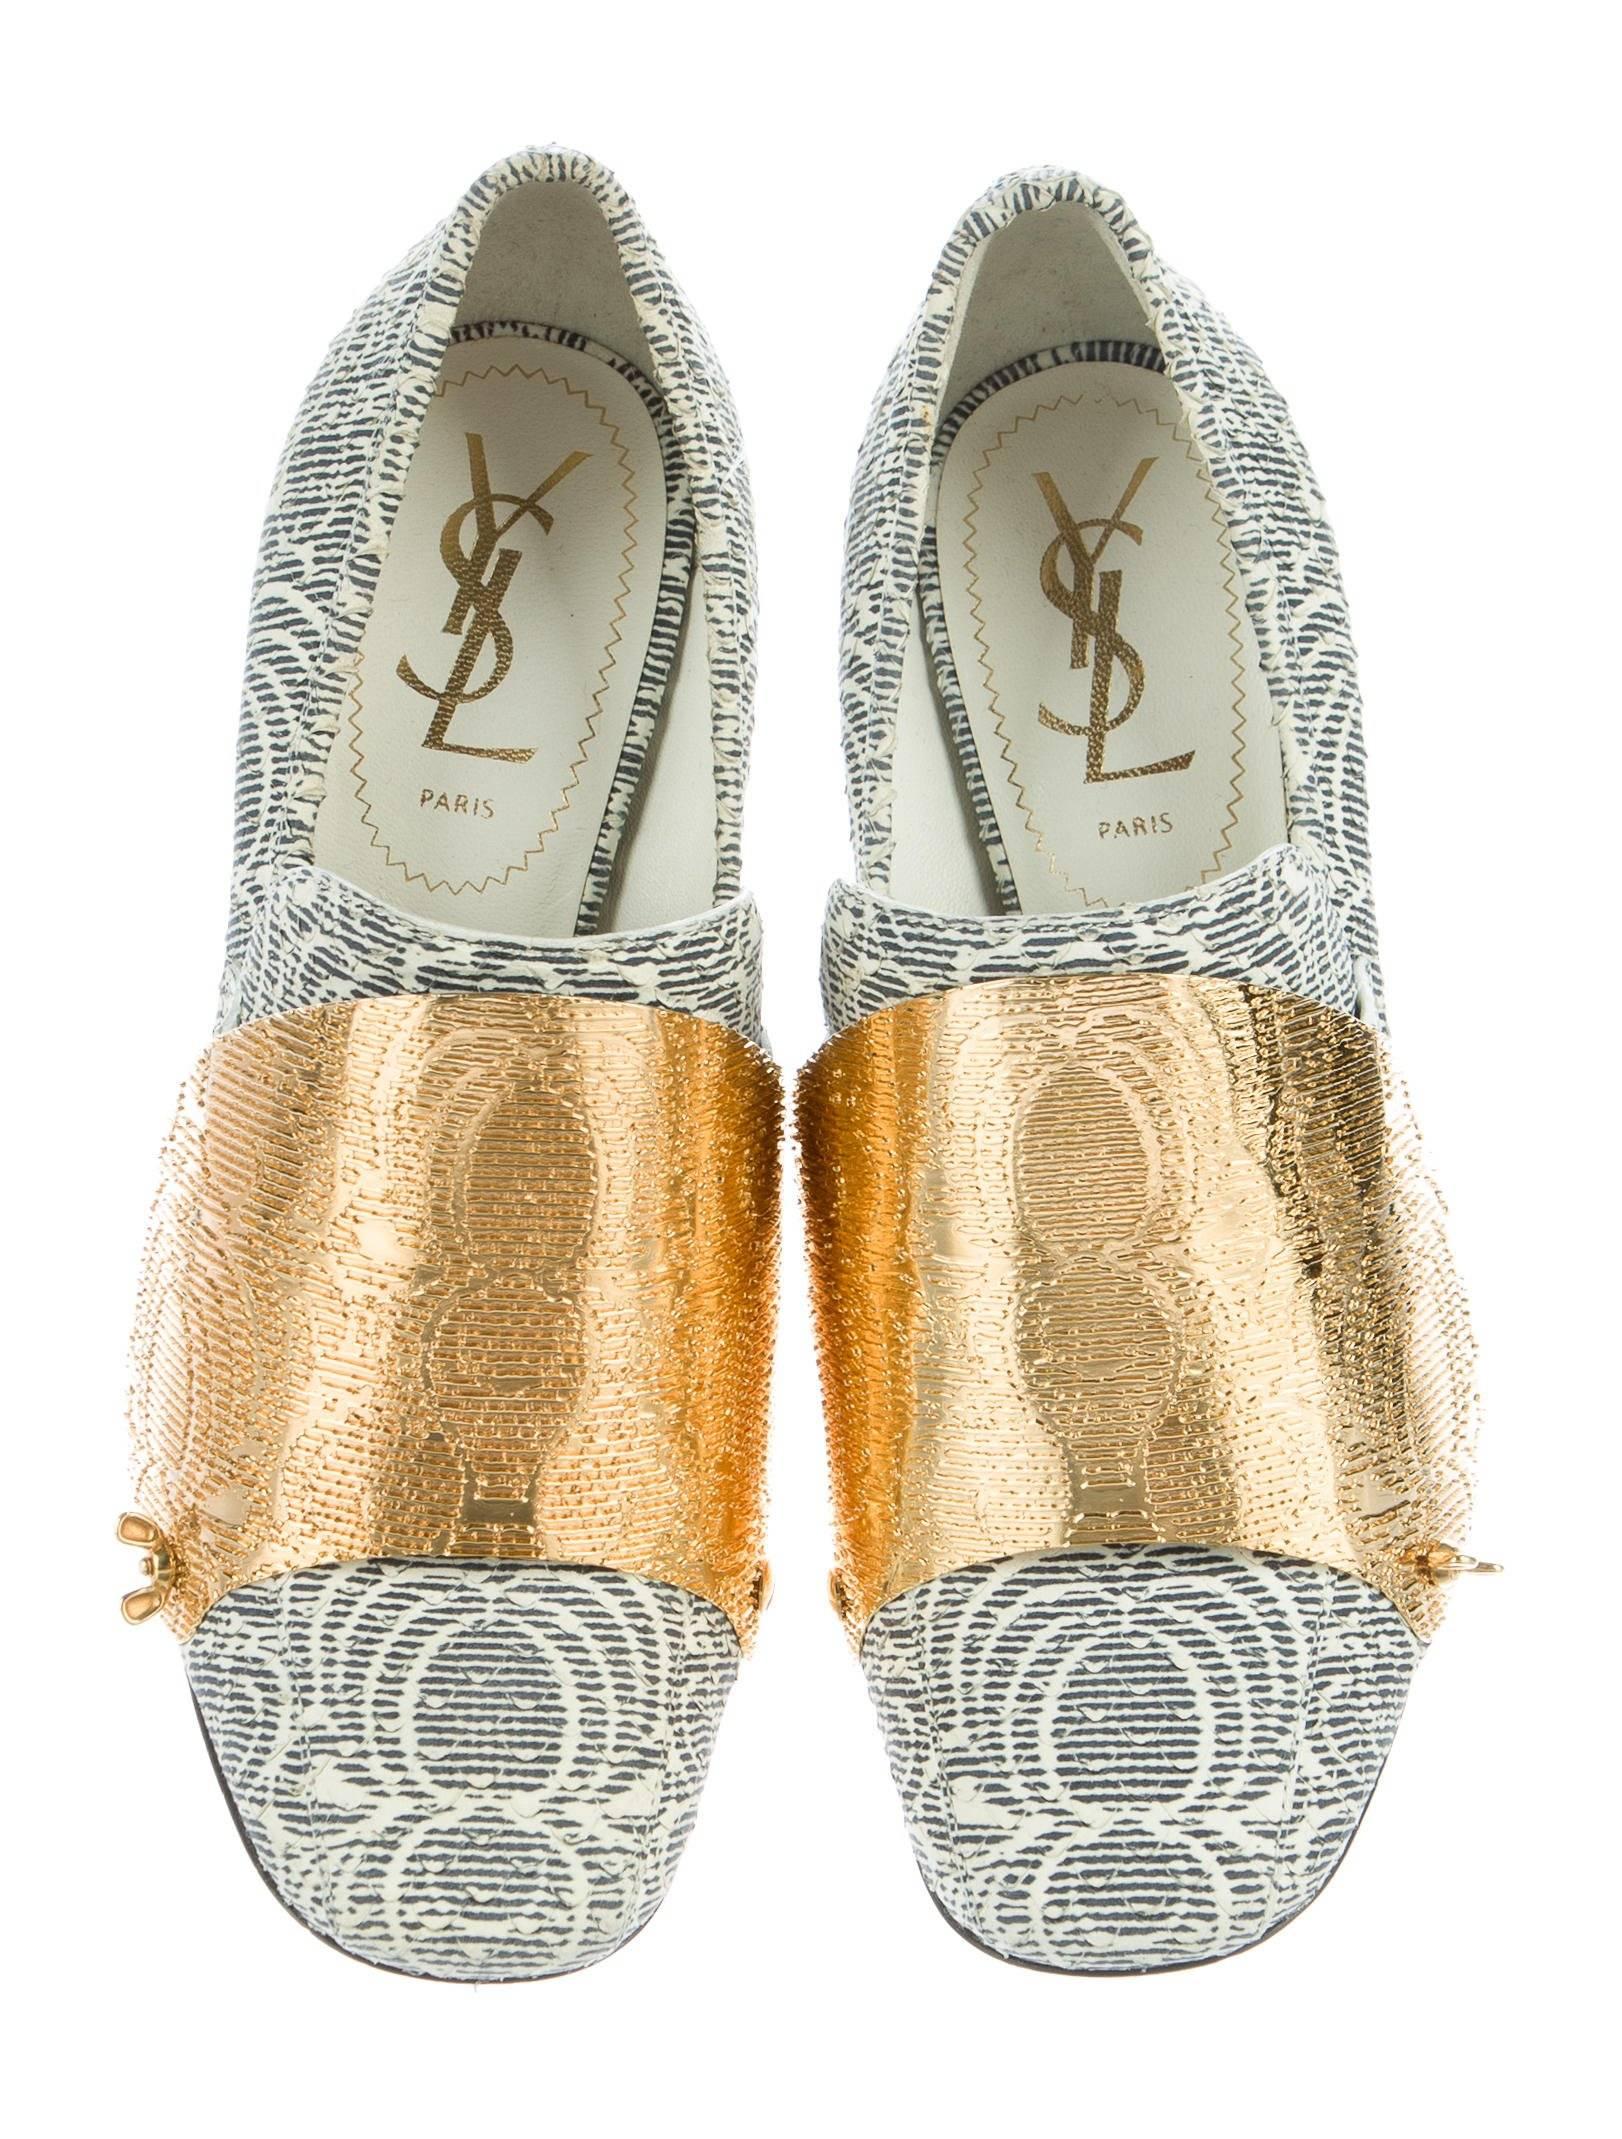 CURATOR'S NOTES

LAST PAIR!  YSL New & SOLD OUT Blue Ivory Gold Plated Block Evening Heels Pumps  

Size IT 36
Leather
Gold tone hardware
Slip on
Made in Italy
Heel height 4" 